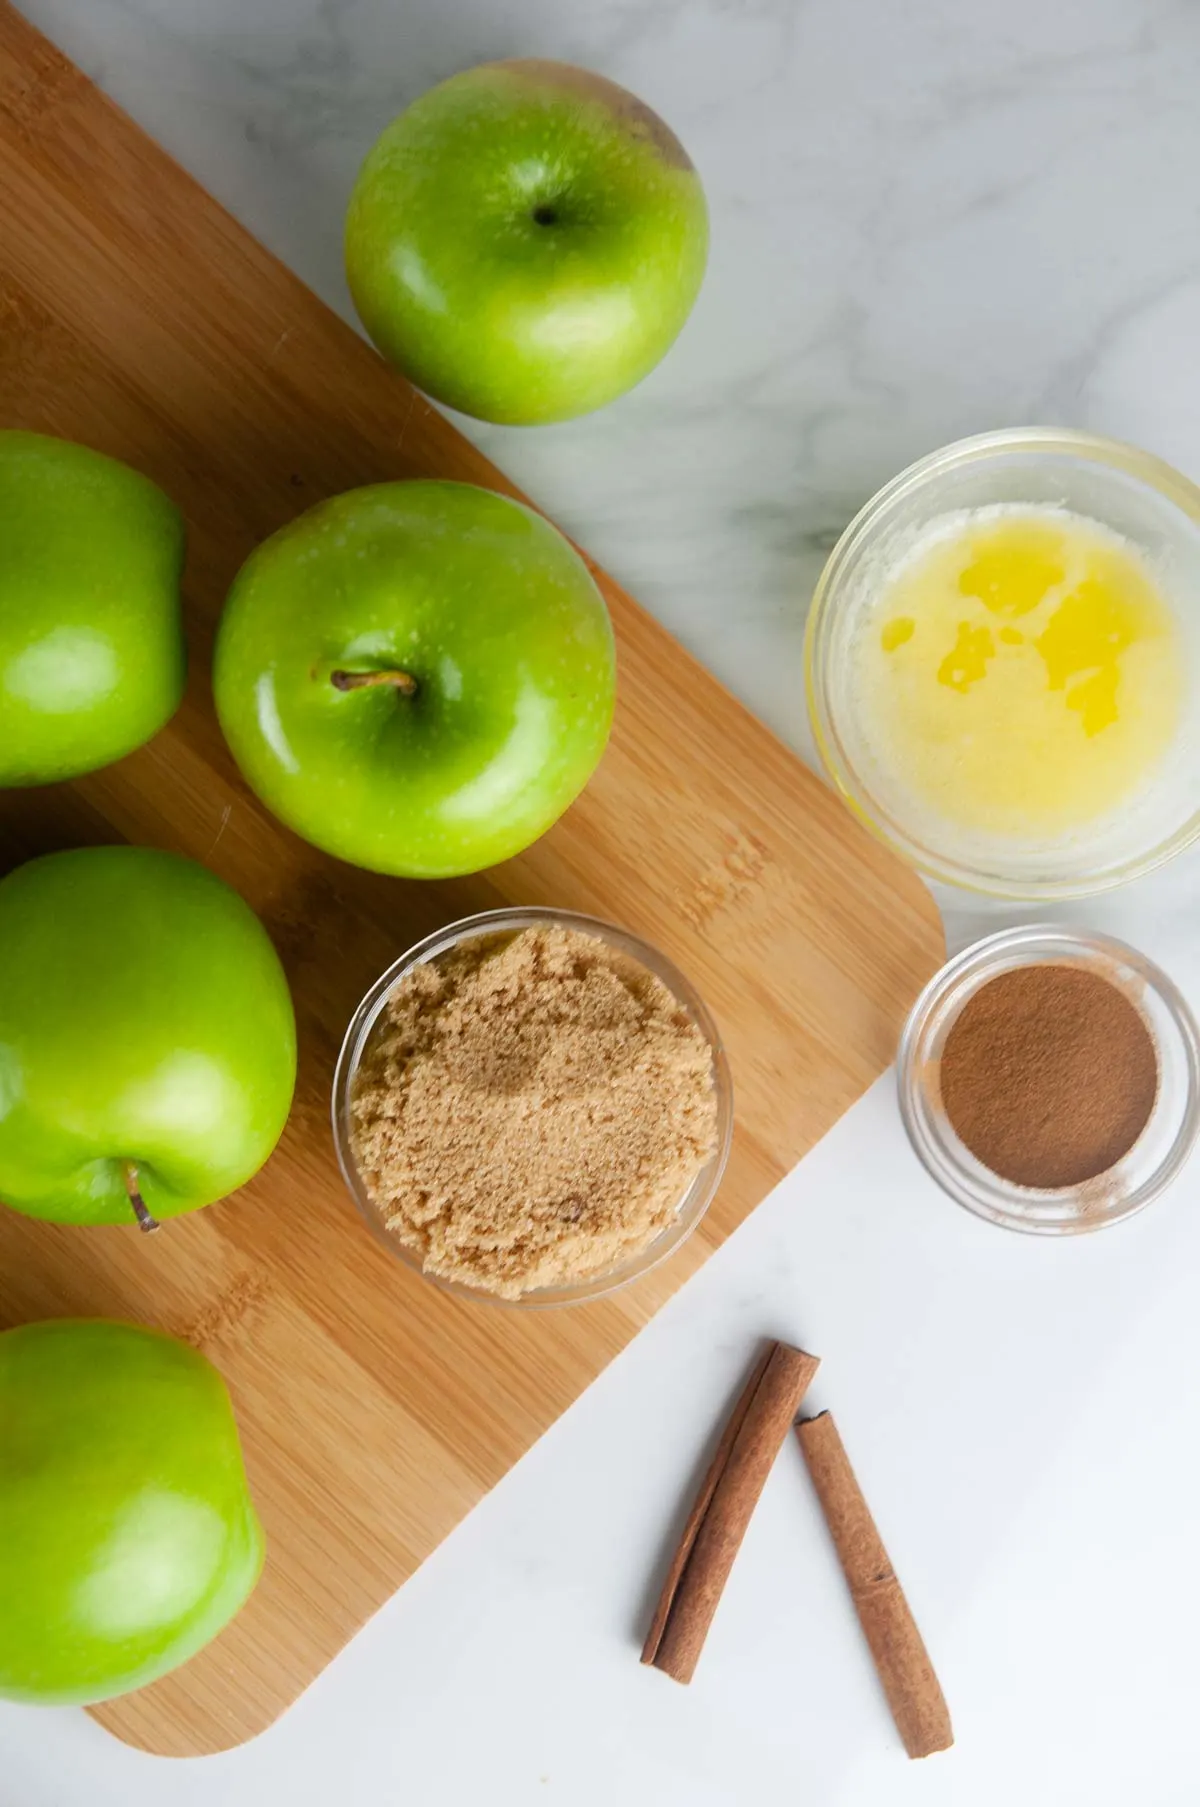 Ingredients for Air Fryer Apples: Apples, Butter, Sugar, and Cinnamon